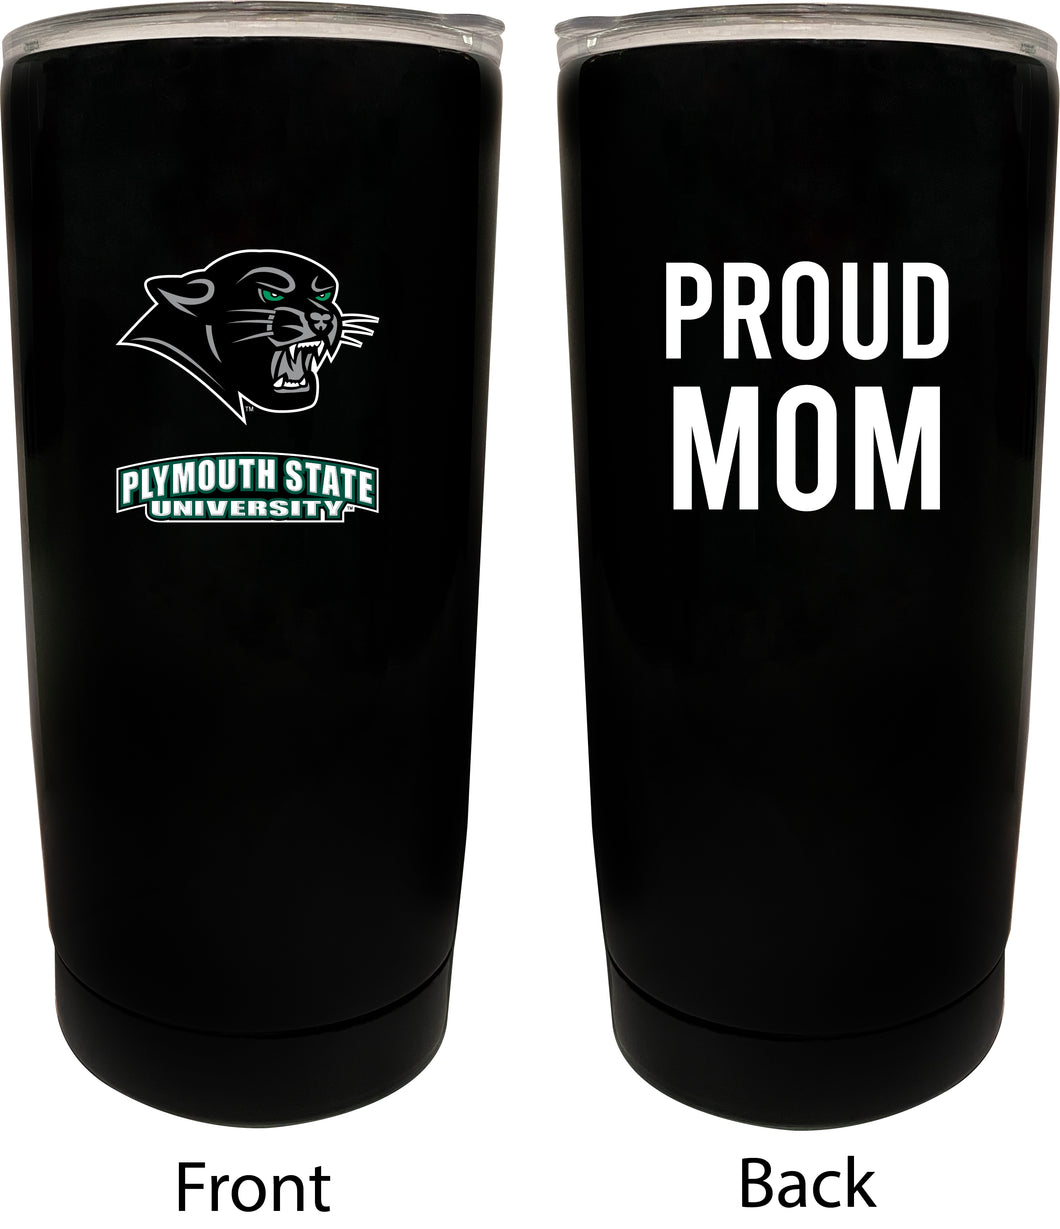 Plymouth State University NCAA Insulated Tumbler - 16oz Stainless Steel Travel Mug Proud Mom Design Black